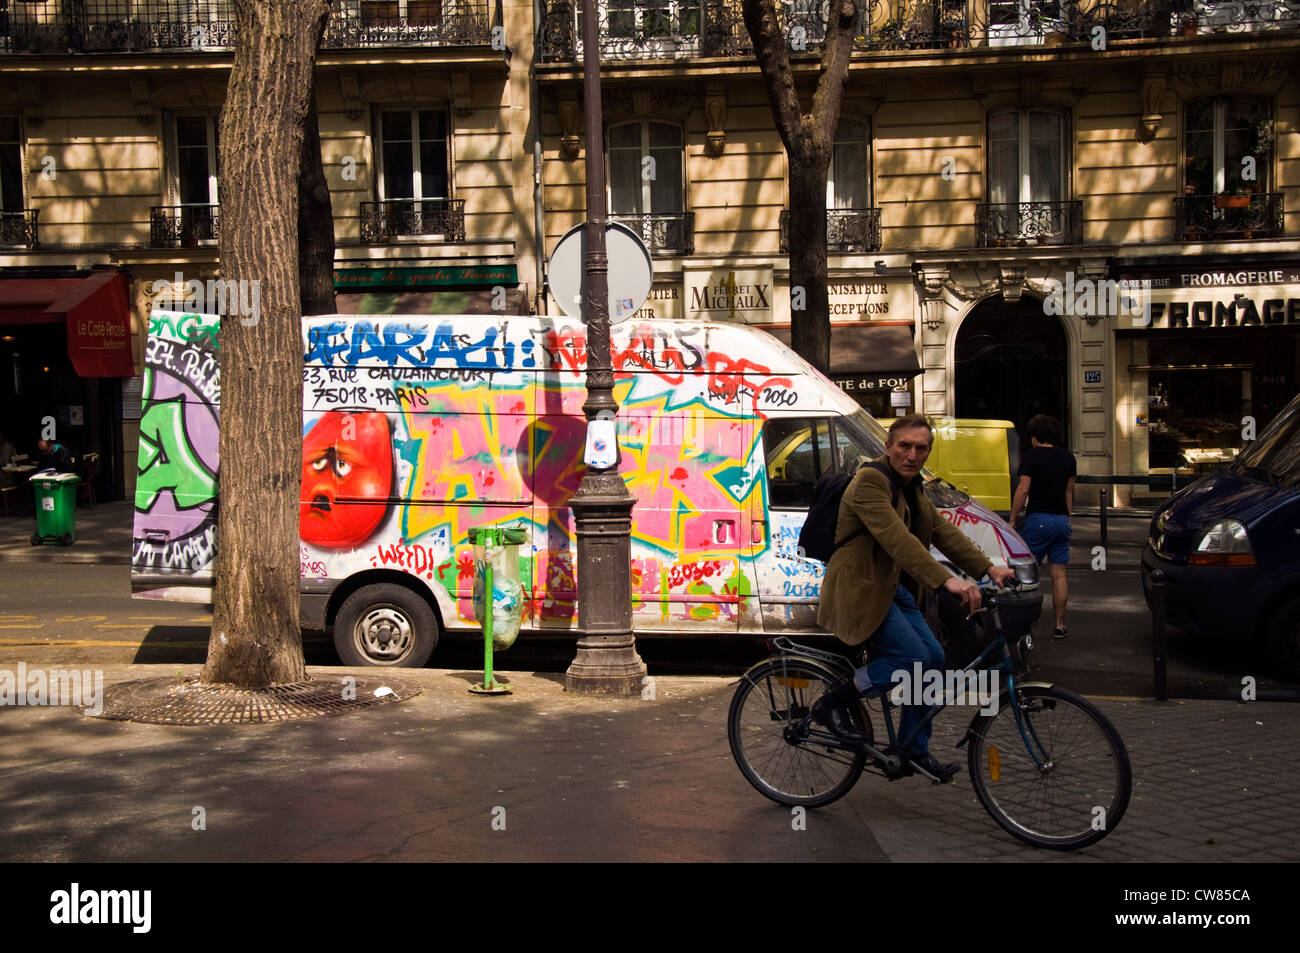 Parisian man cycles on the pavement past a grafftied van in Montmartre district Stock Photo